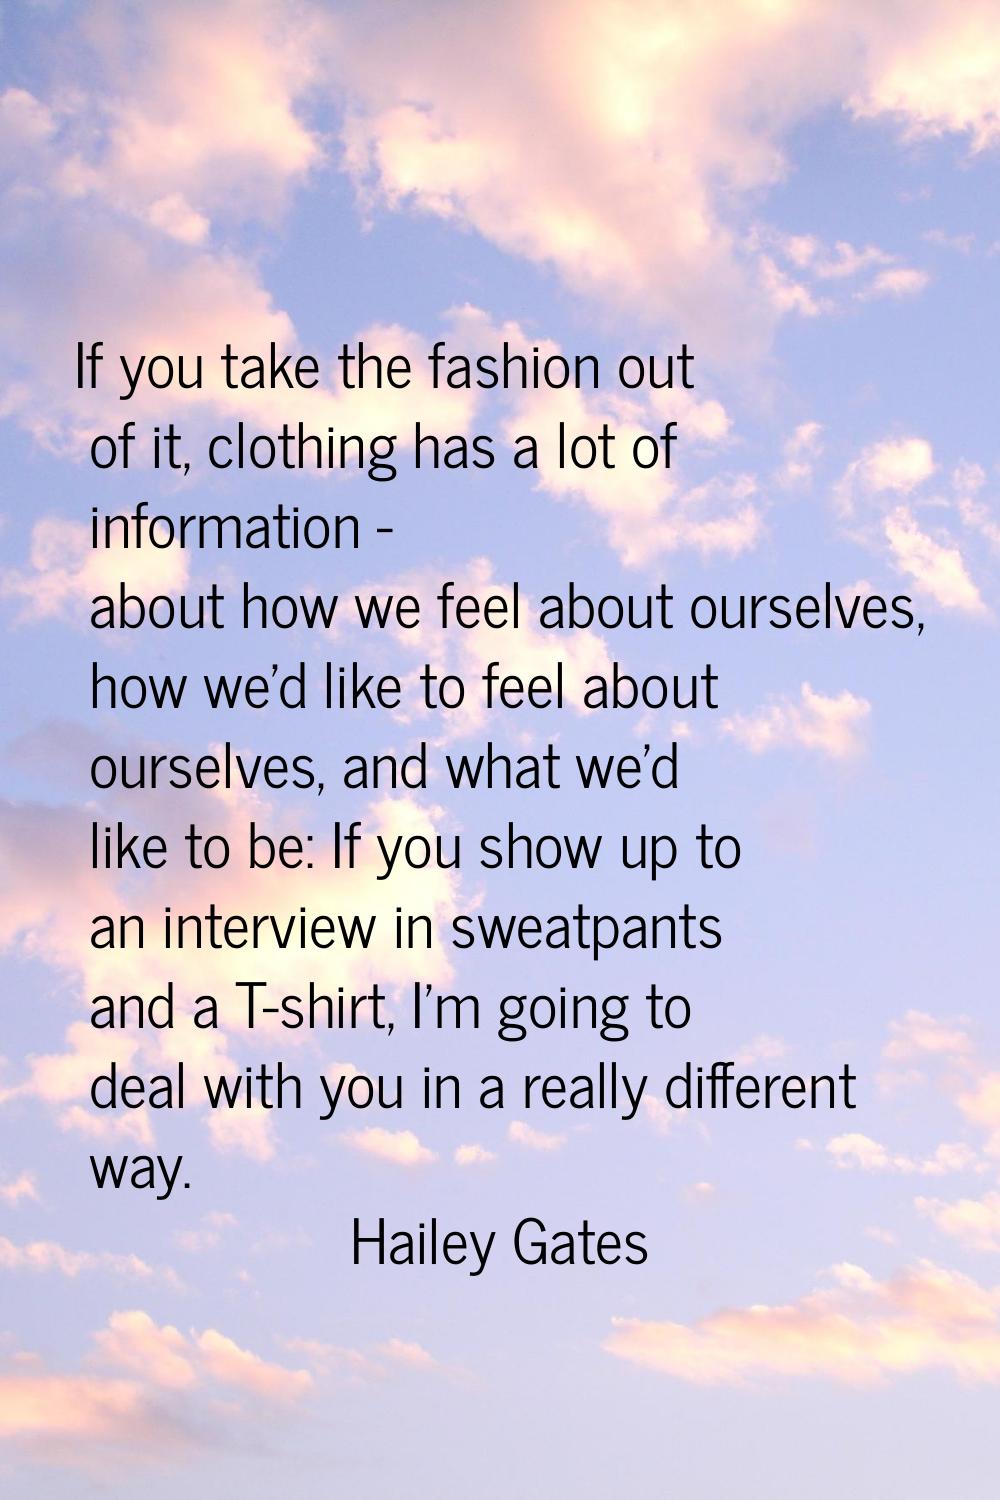 If you take the fashion out of it, clothing has a lot of information - about how we feel about ours